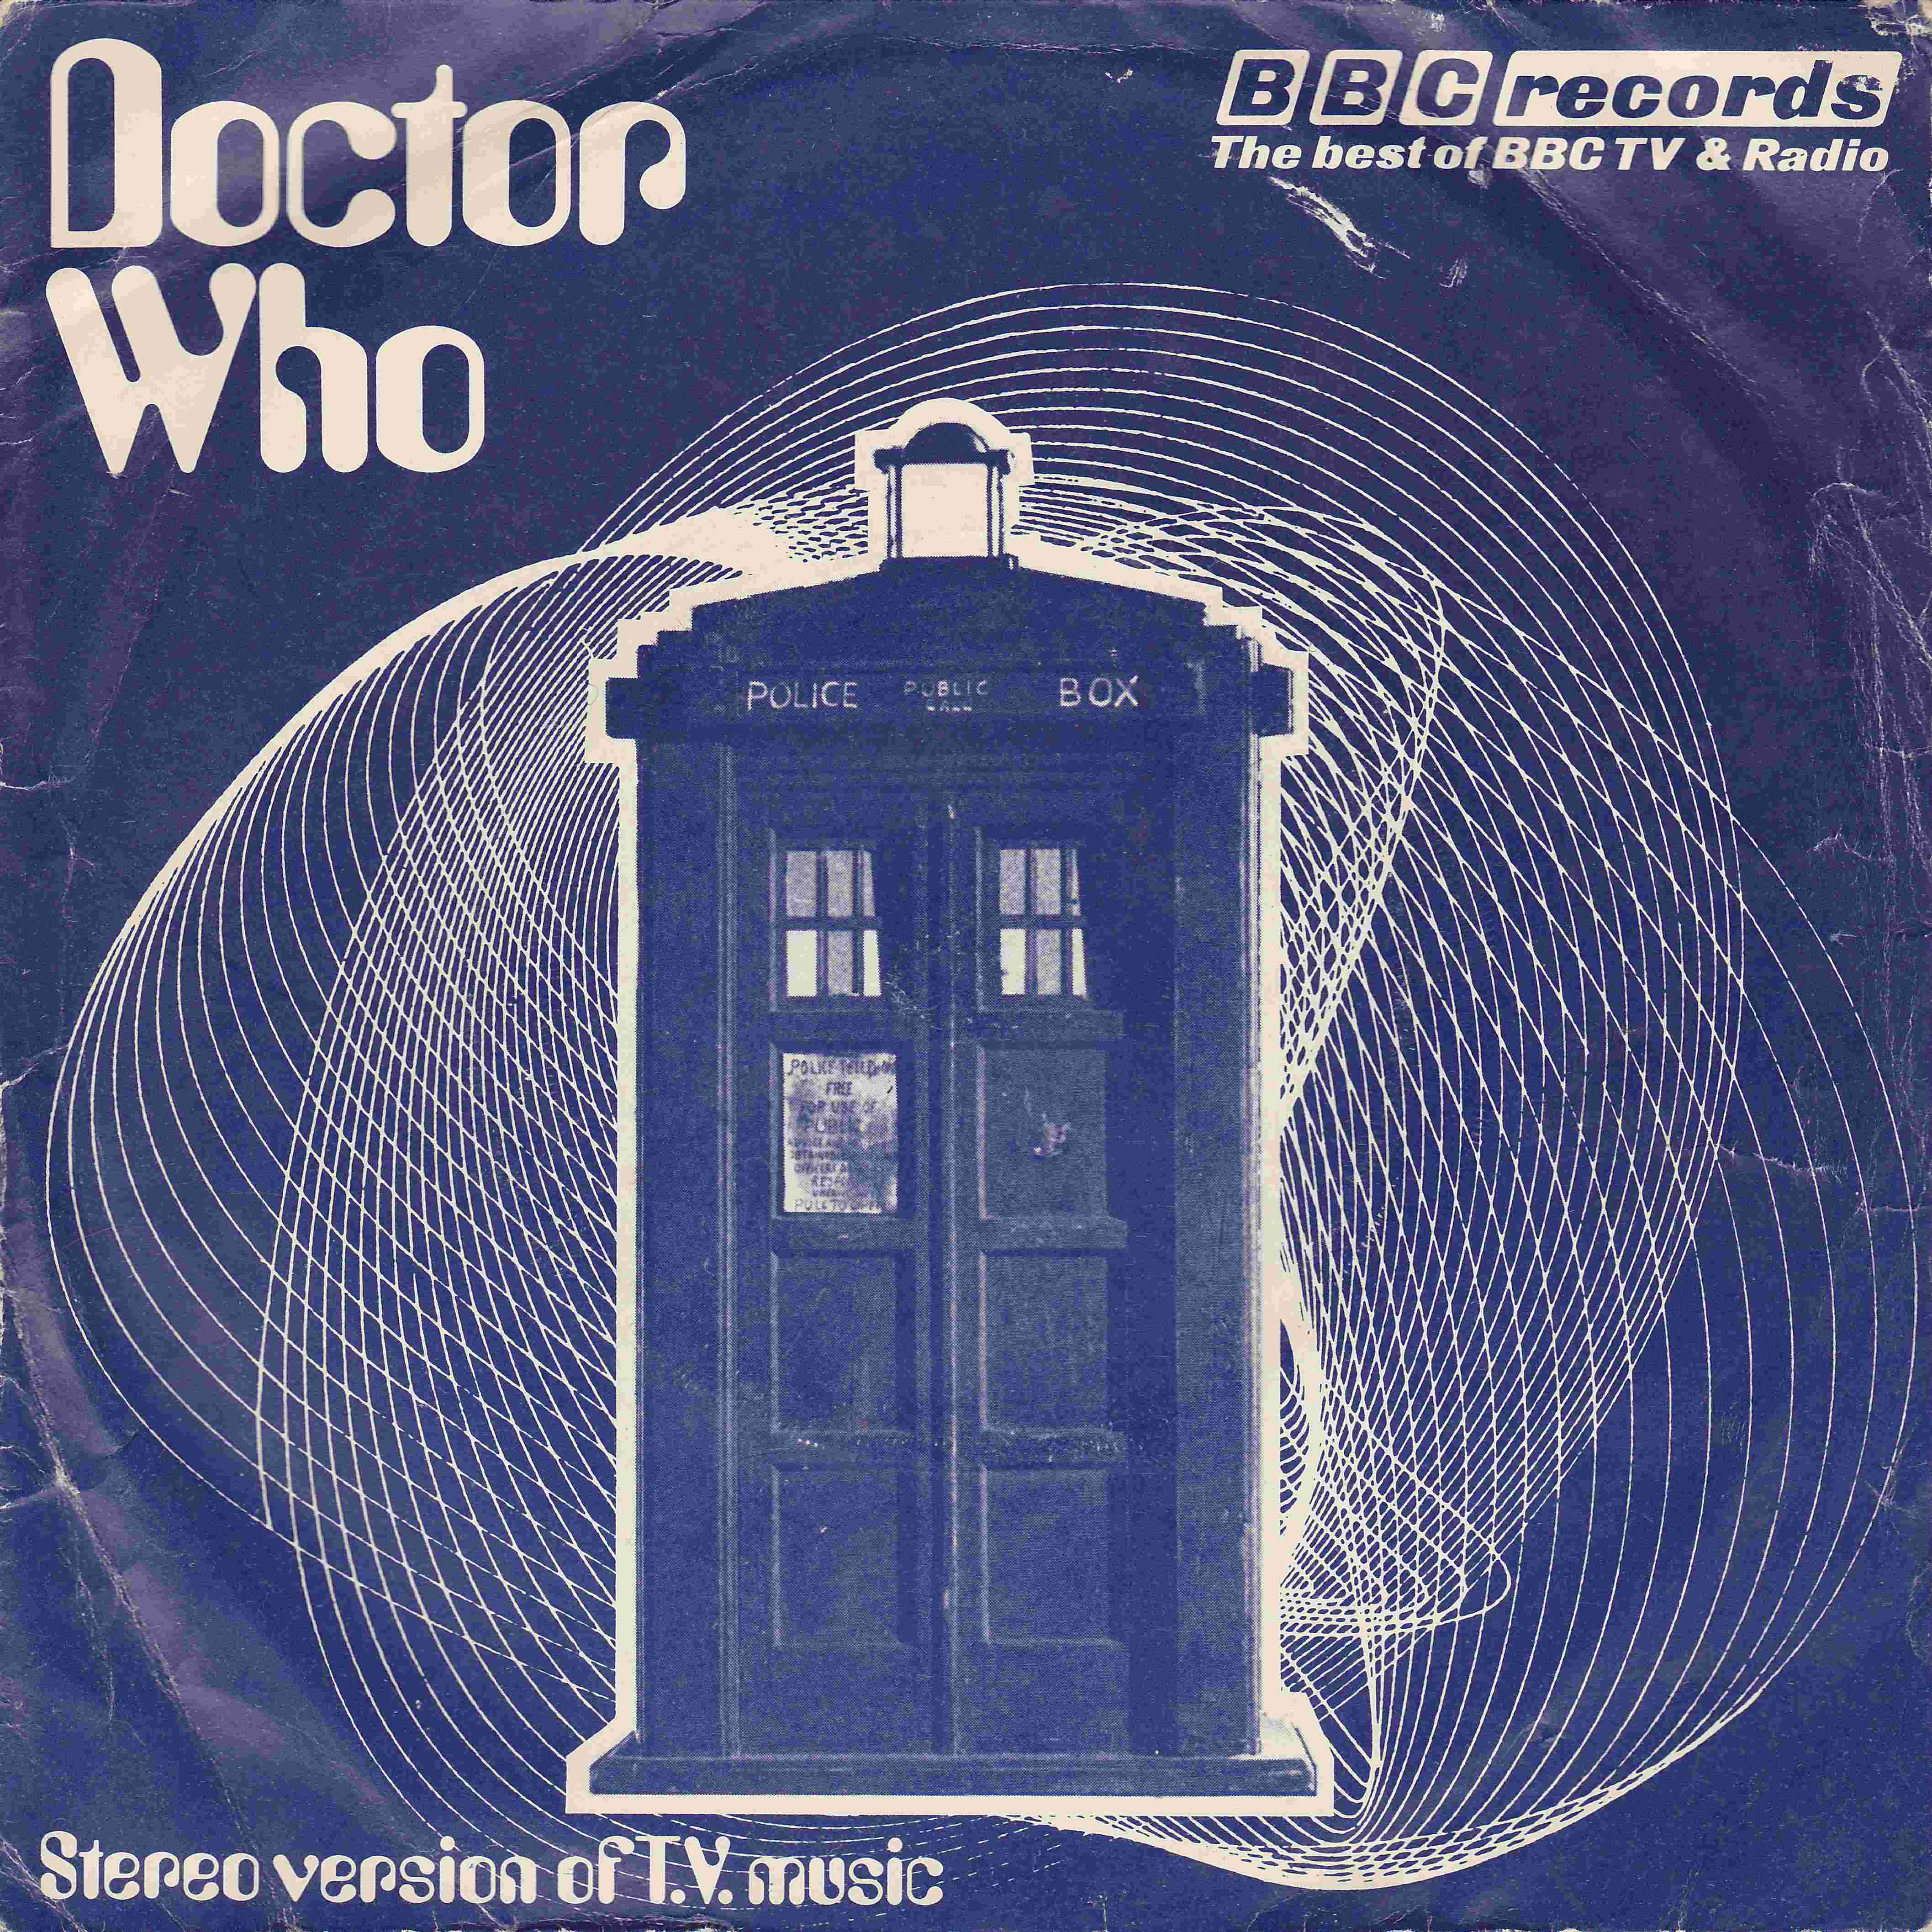 Picture of RESL 11 Doctor Who by artist Ron Grainer from the BBC records and Tapes library